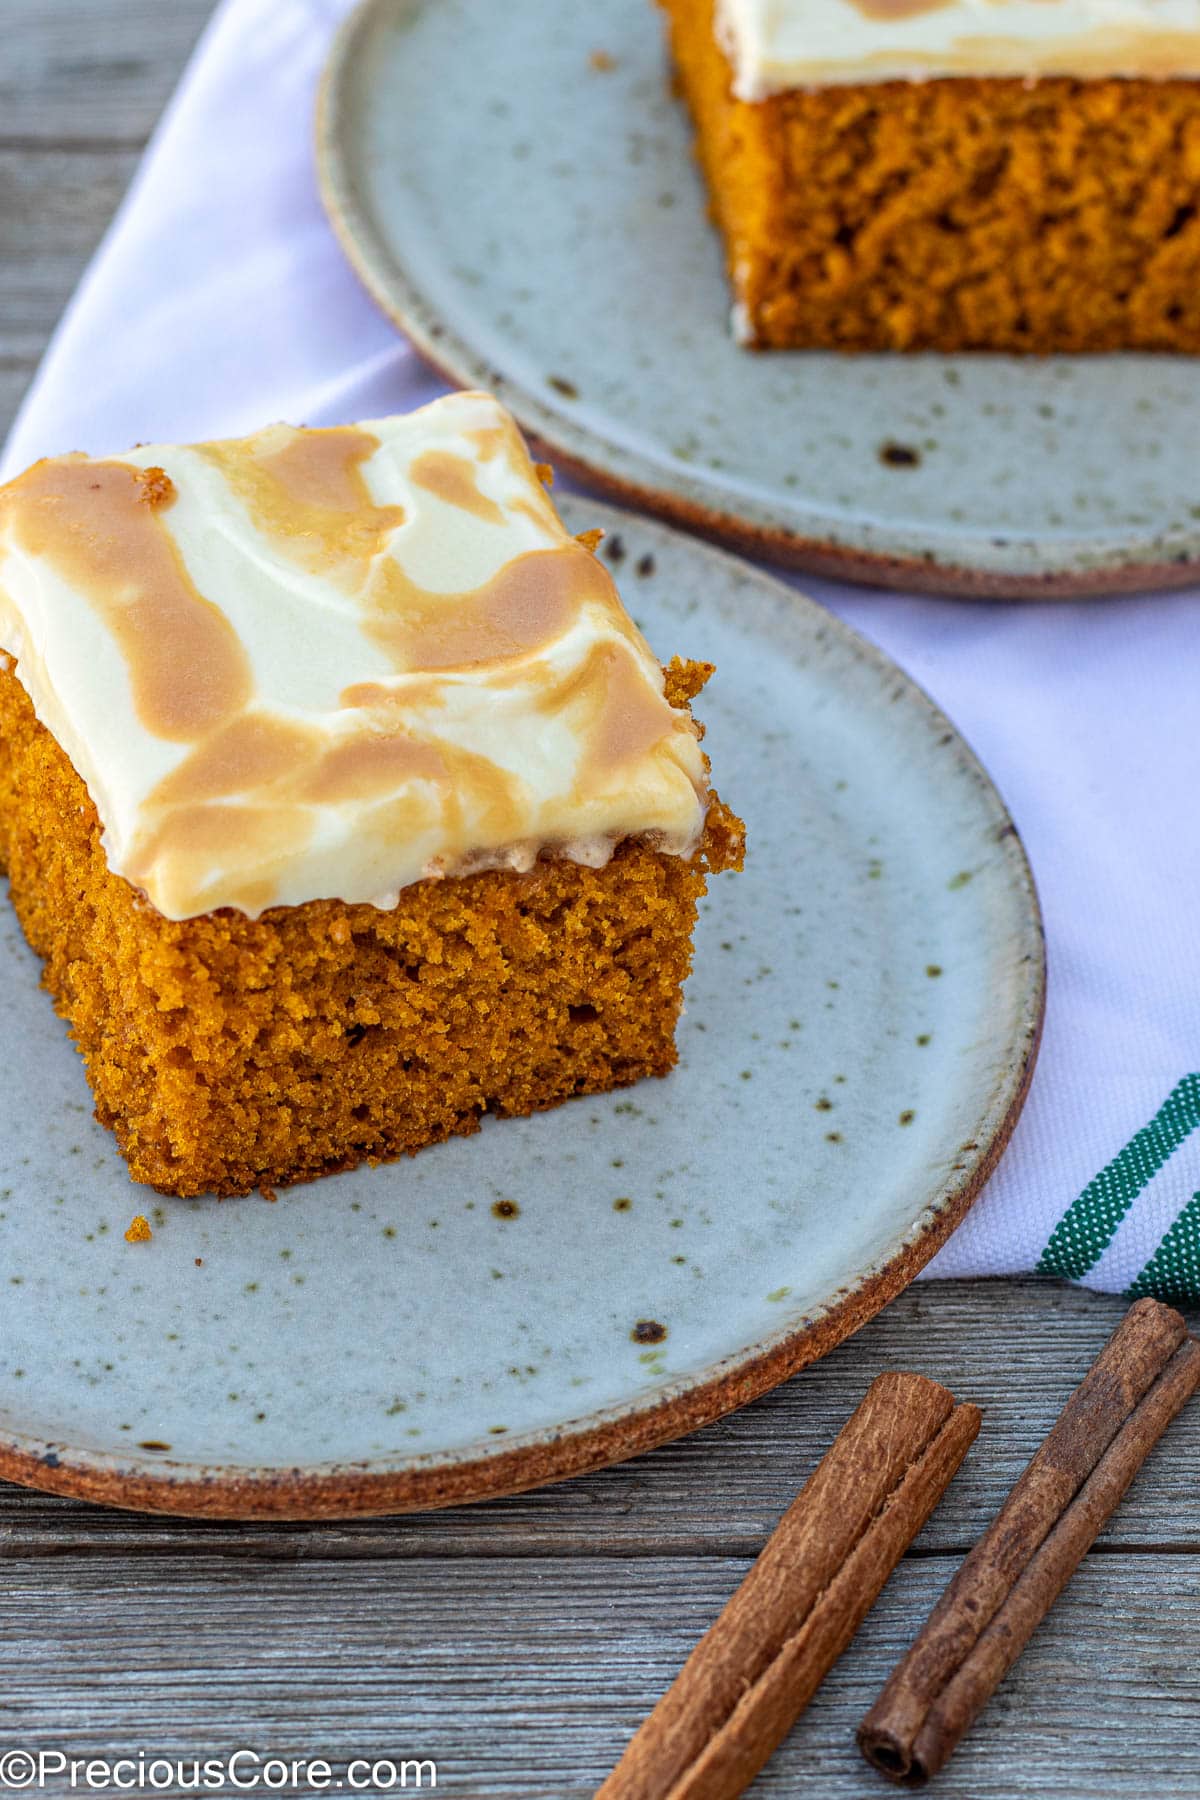 Slices of pumpkin cake on small plates.